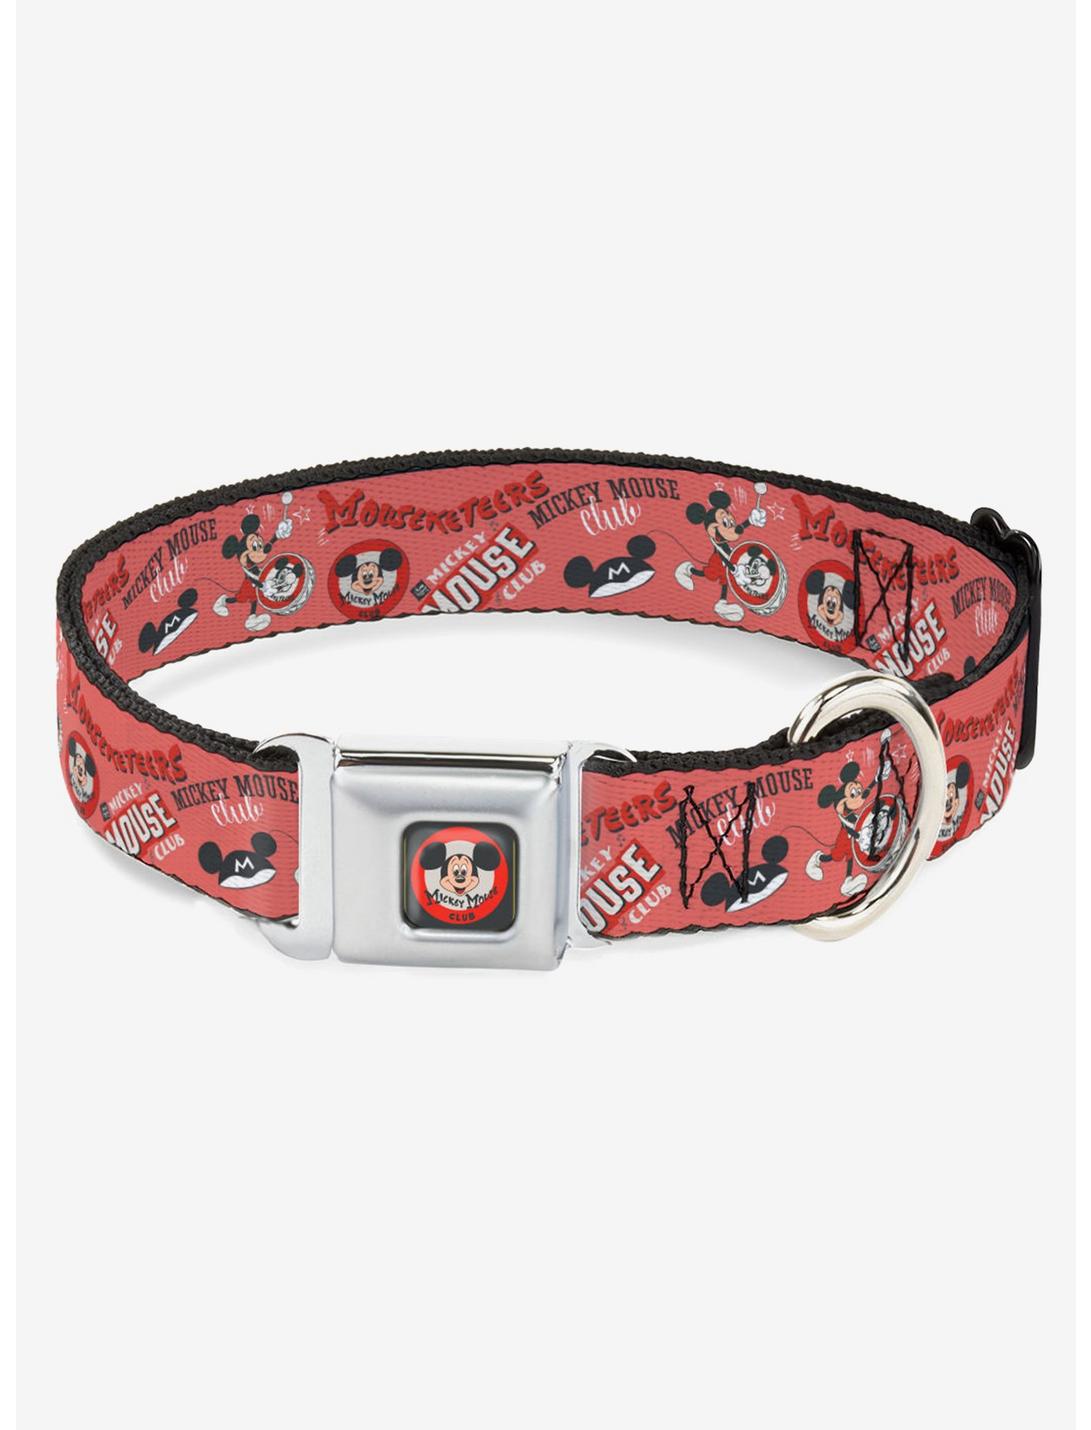 Disney100 Mickey Mouse Club Collage Seatbelt Buckle Dog Collar, RED, hi-res